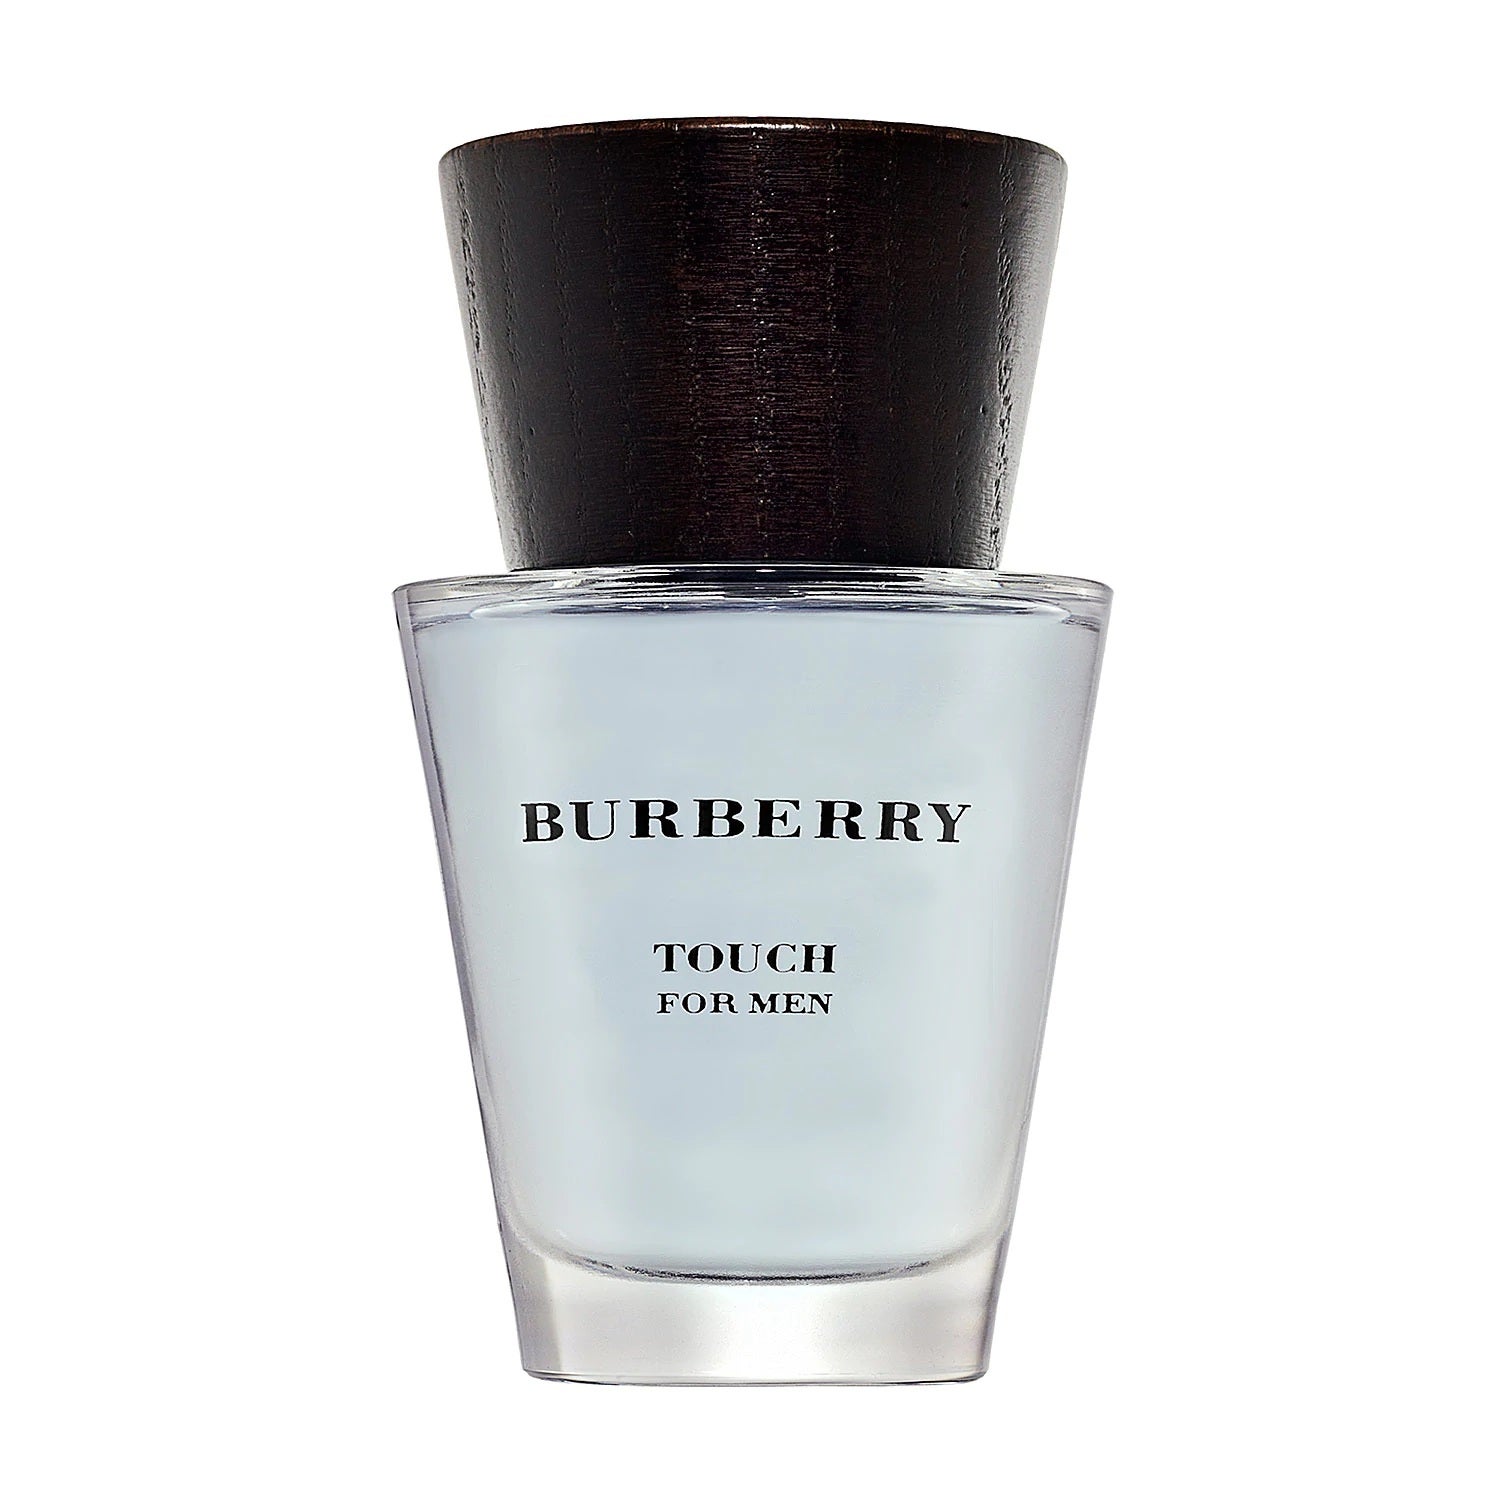 Burberry Touch Men's Cologne